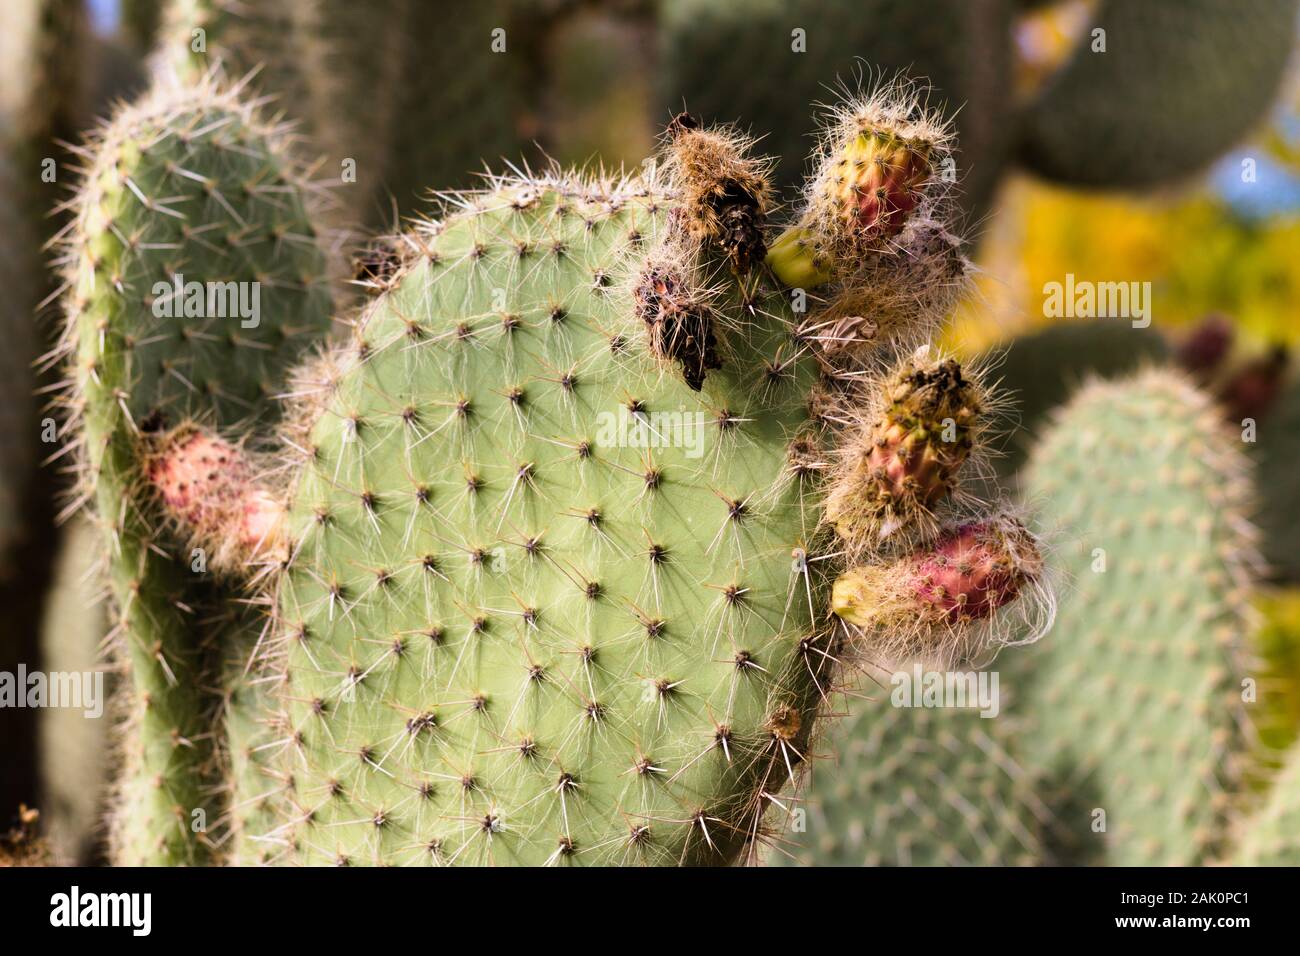 Cactus with a lot of buds growing from the base. Stock Photo